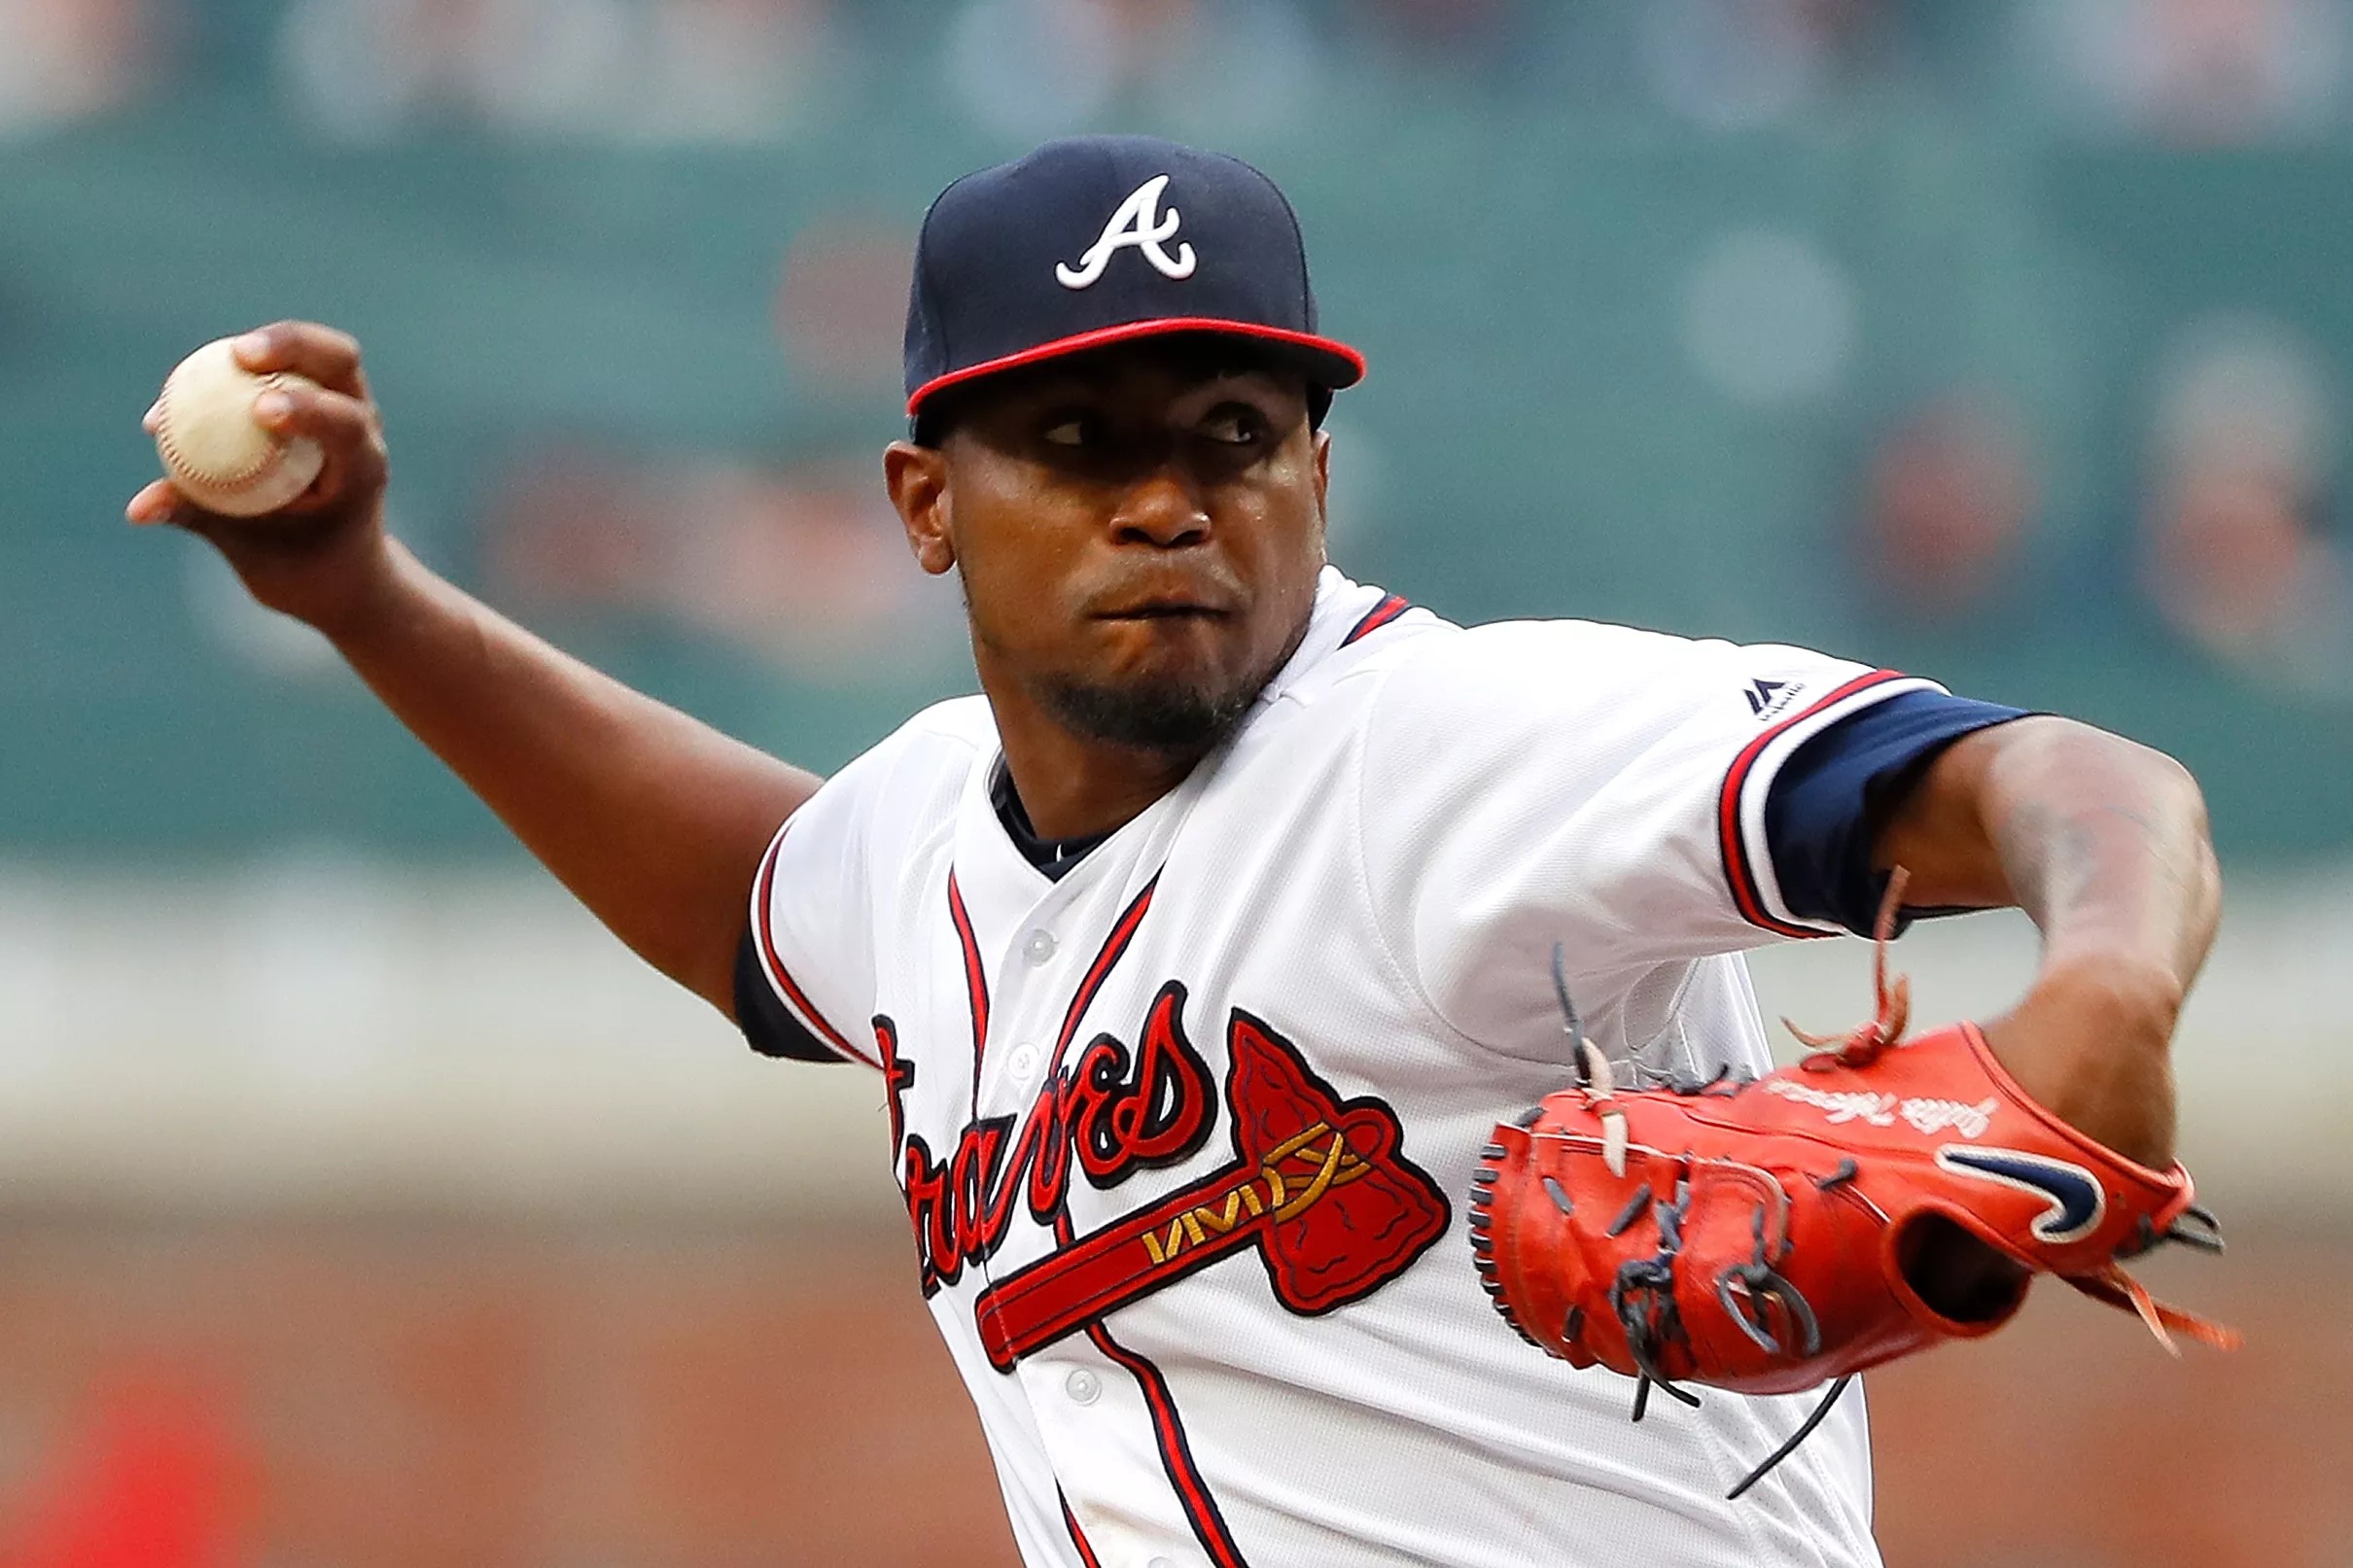 Julio Teheran completes bullpen session, on track for Wednesday